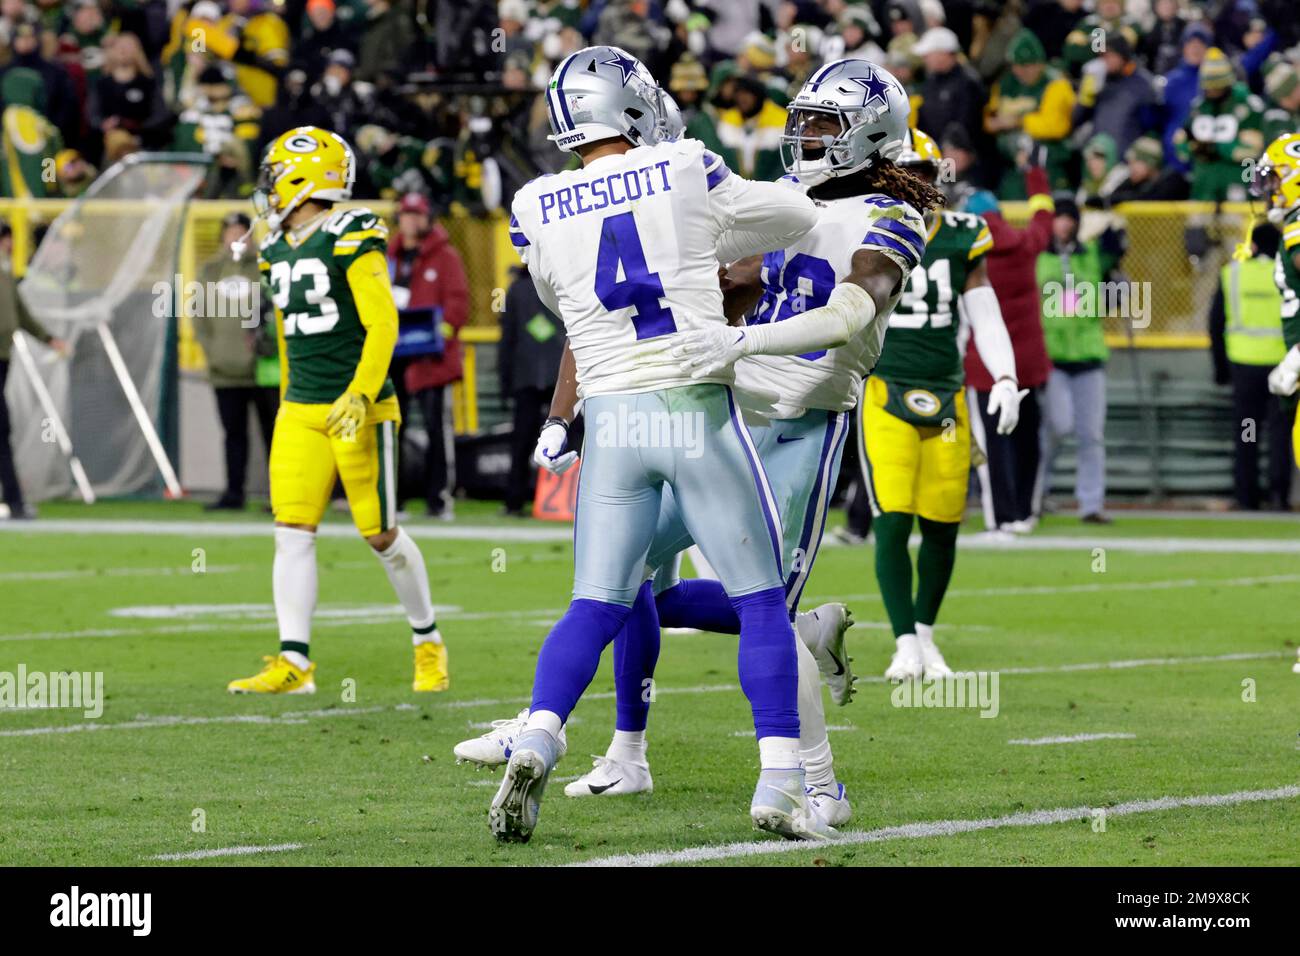 Dallas Cowboys wide receiver CeeDee Lamb (88)scores a touchdown against the  Green Bay Packers during an NFL football game Sunday, Nov. 13, 2022, in  Green Bay, Wis. (AP Photo/Jeffrey Phelps Stock Photo 